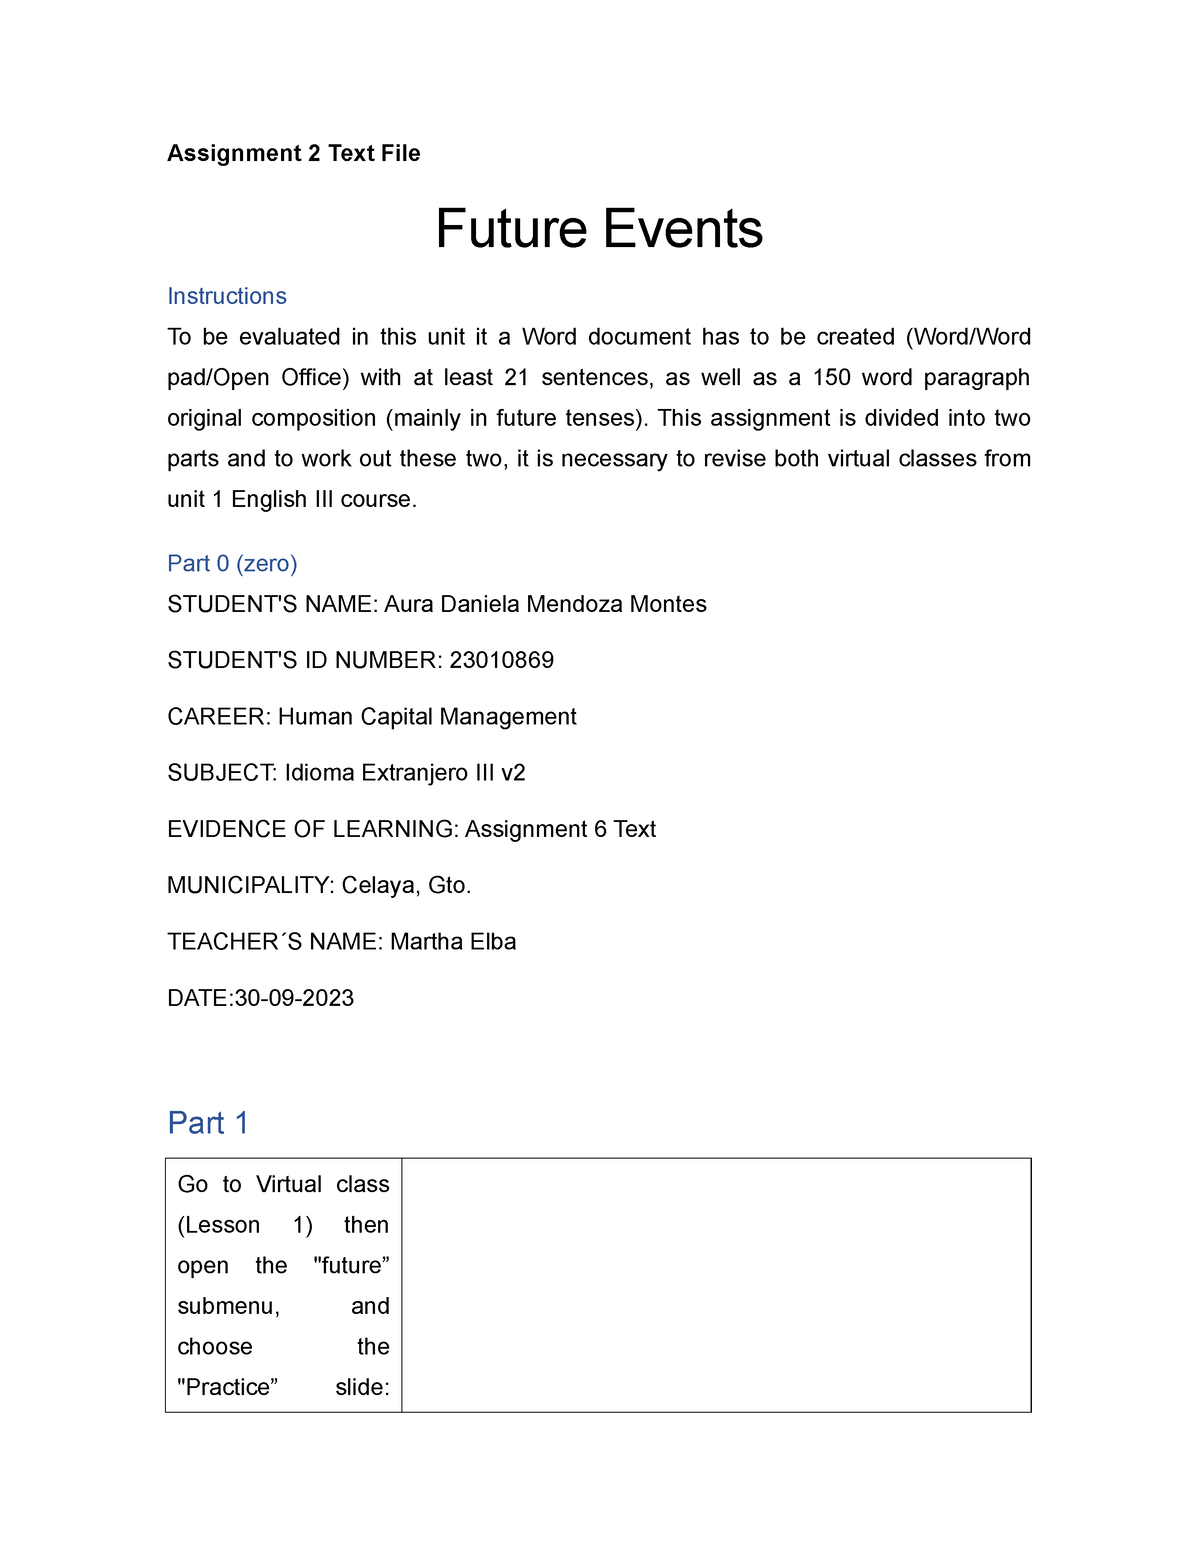 assignment 2 text file future events uveg